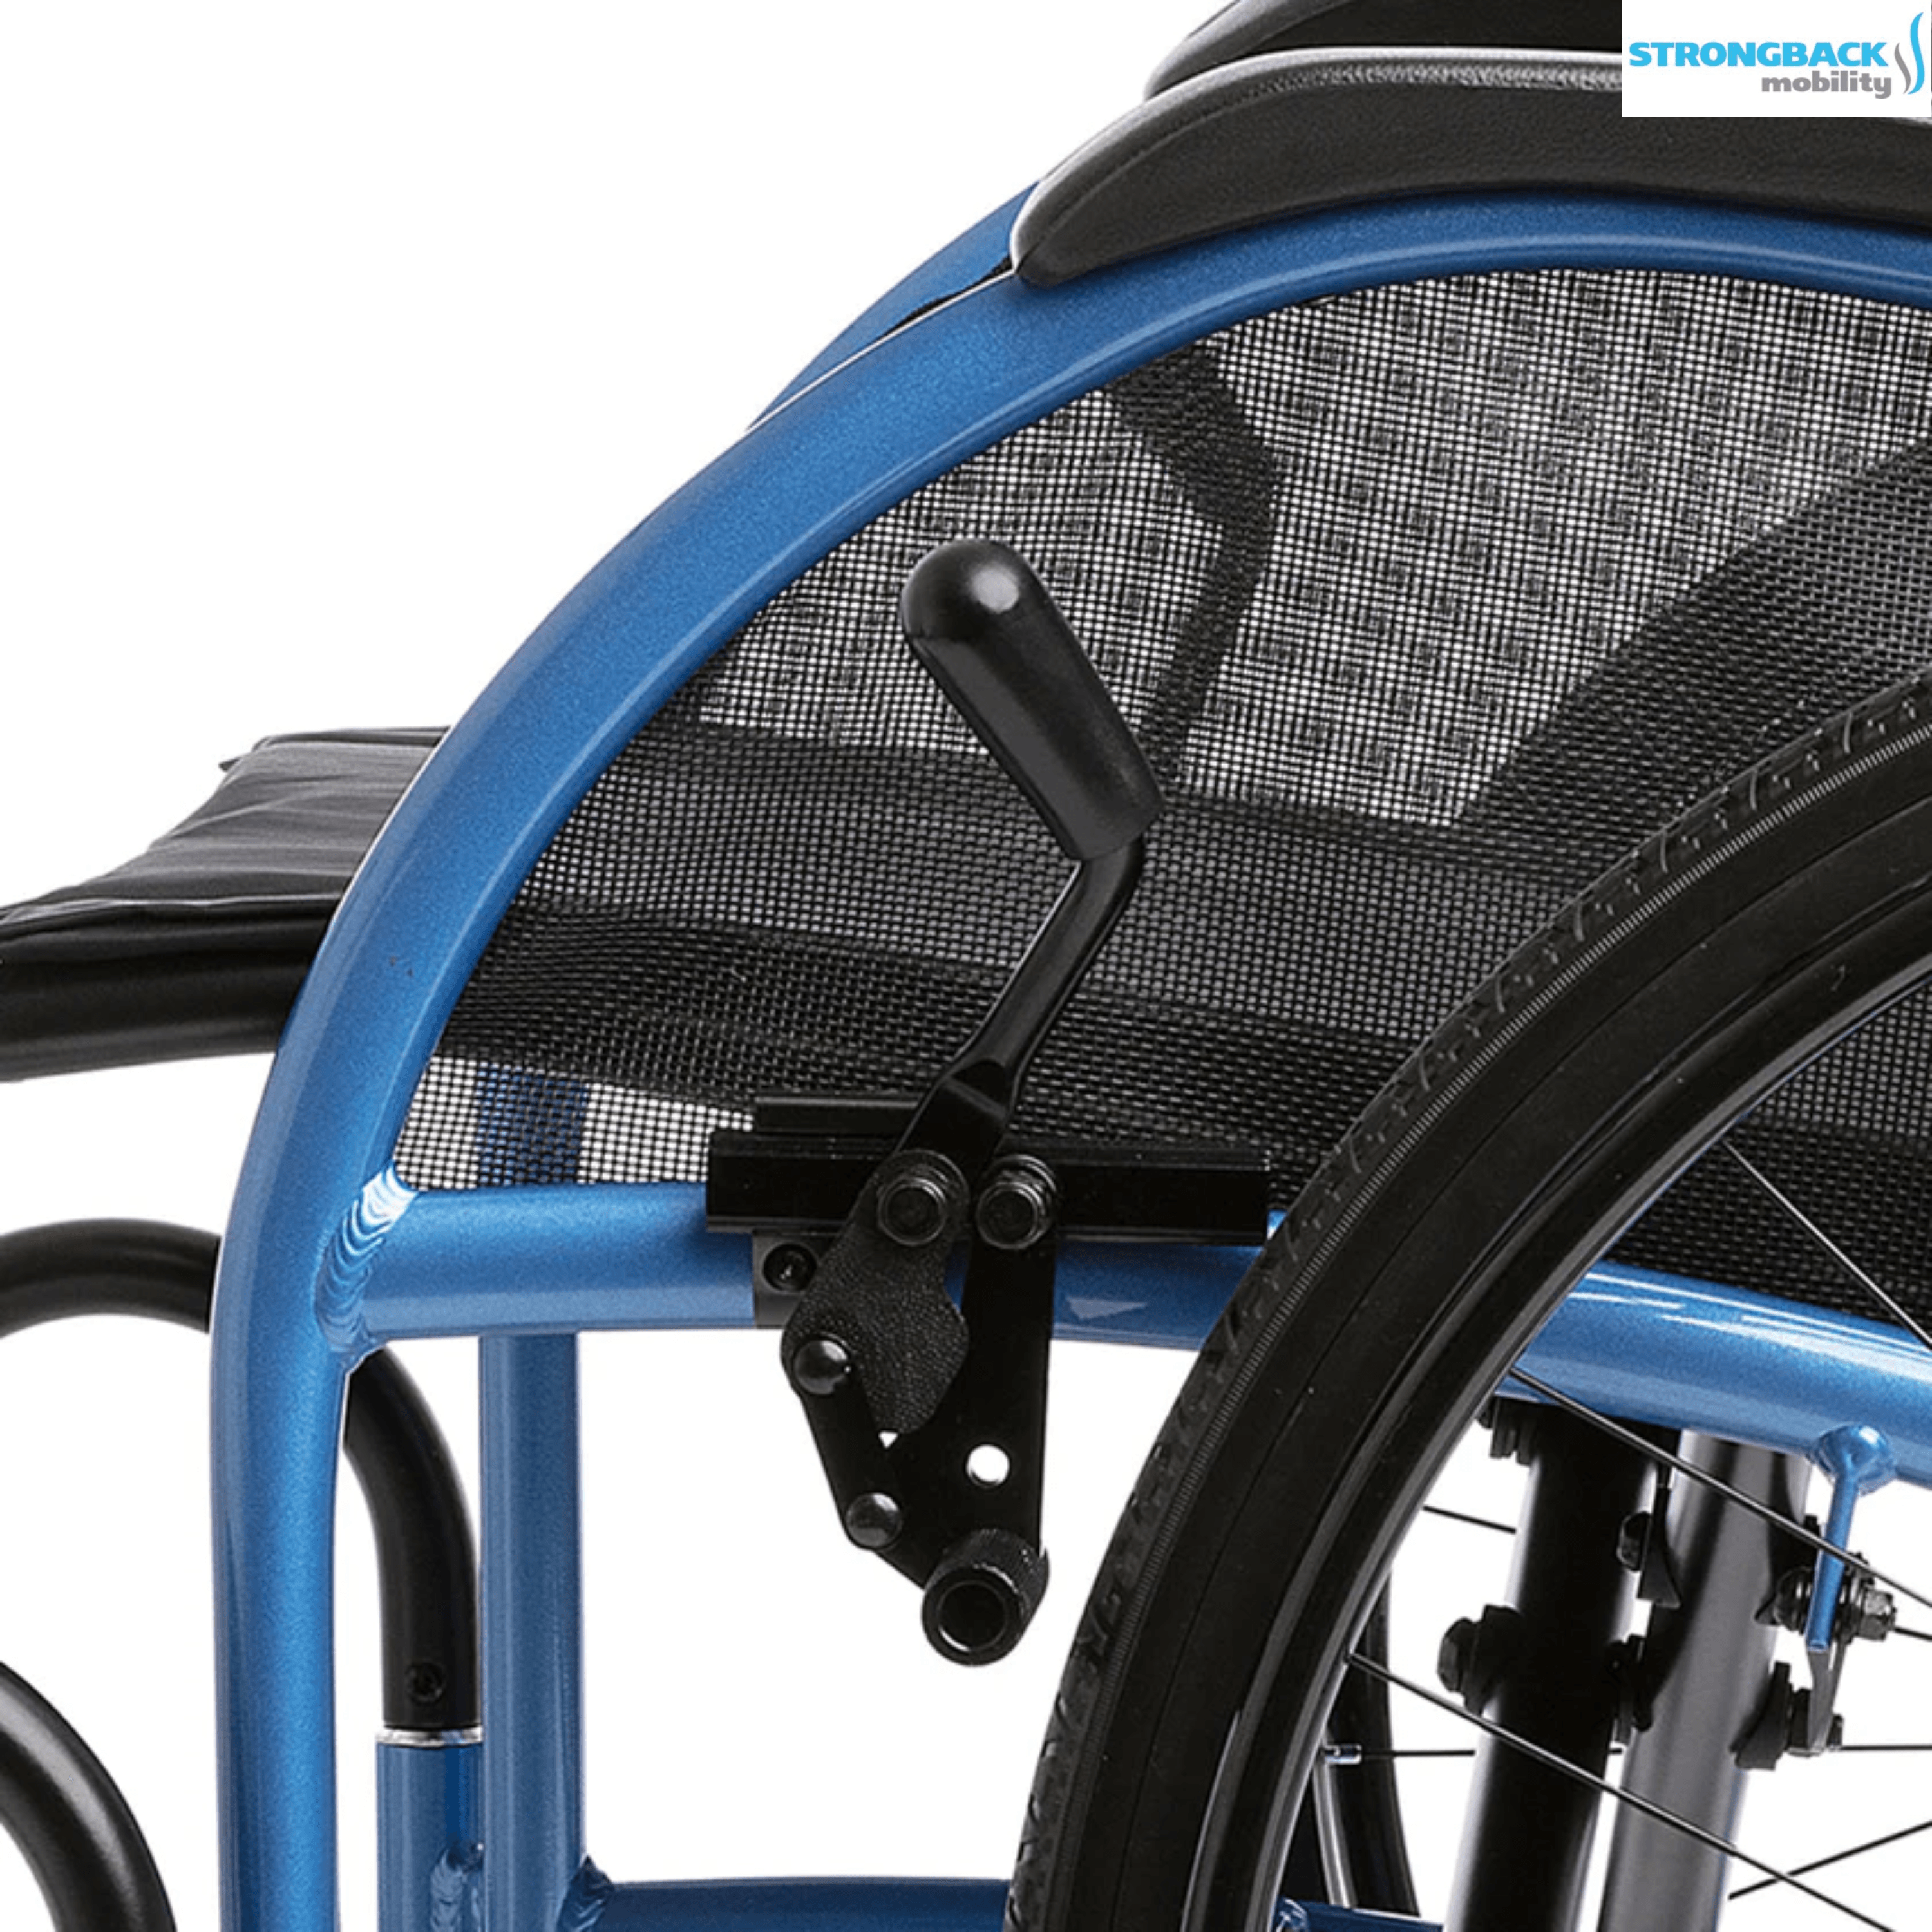 STRONGBACK 22S+AB Wheelchair Lightweight and Comfortable Strongback